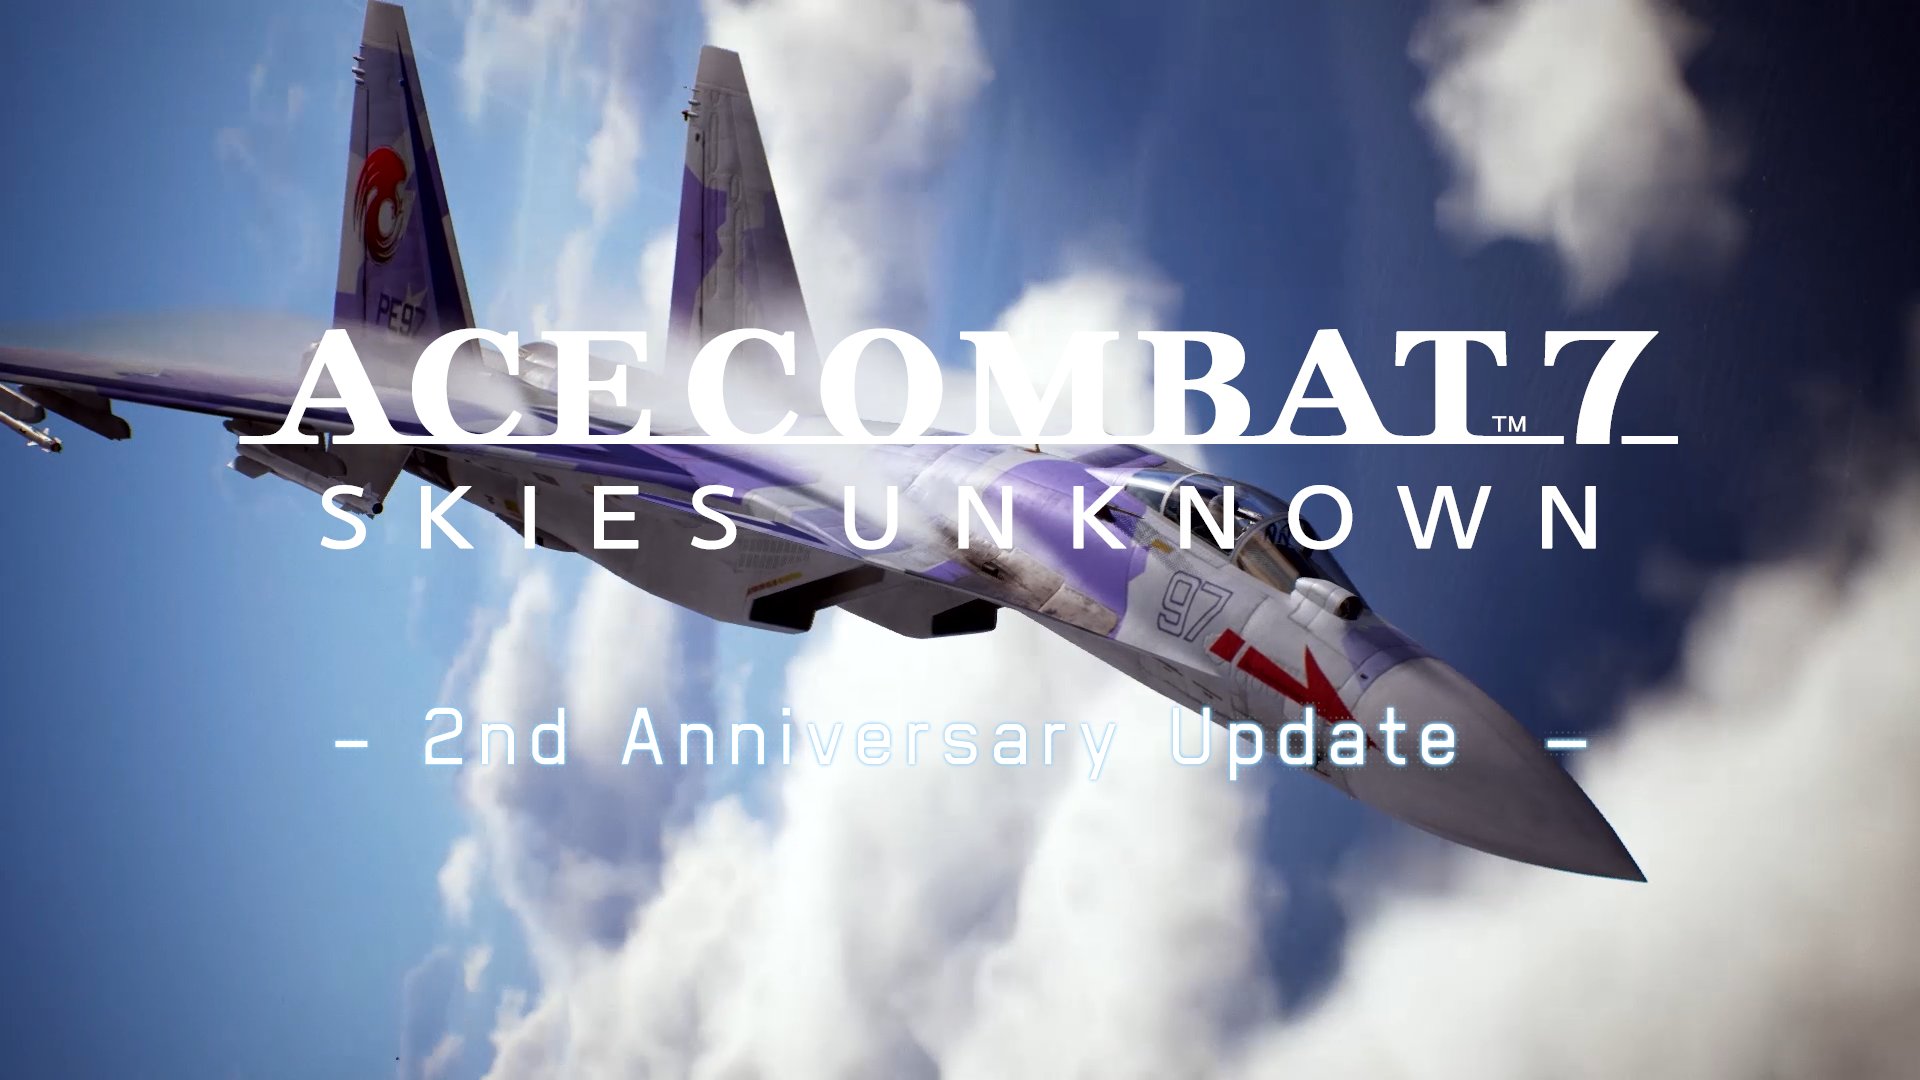 Ace Combat 7: Skies Unknown ‘2nd Anniversary Update’ will be released on January 19 and sales are 2.5 million